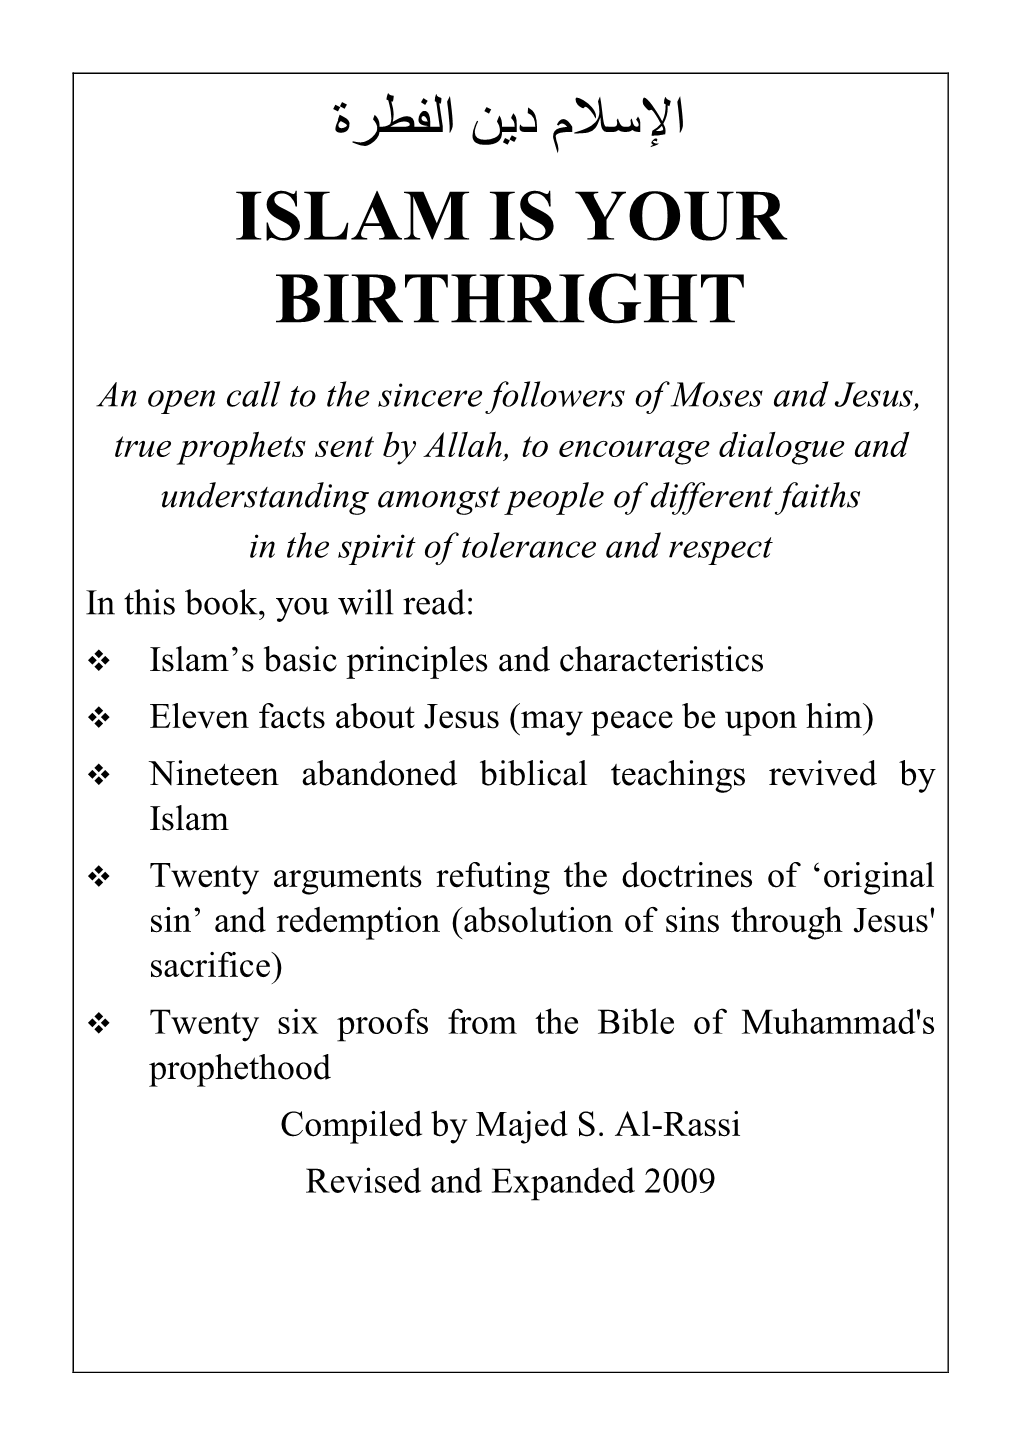 Islam Is Your Birthright